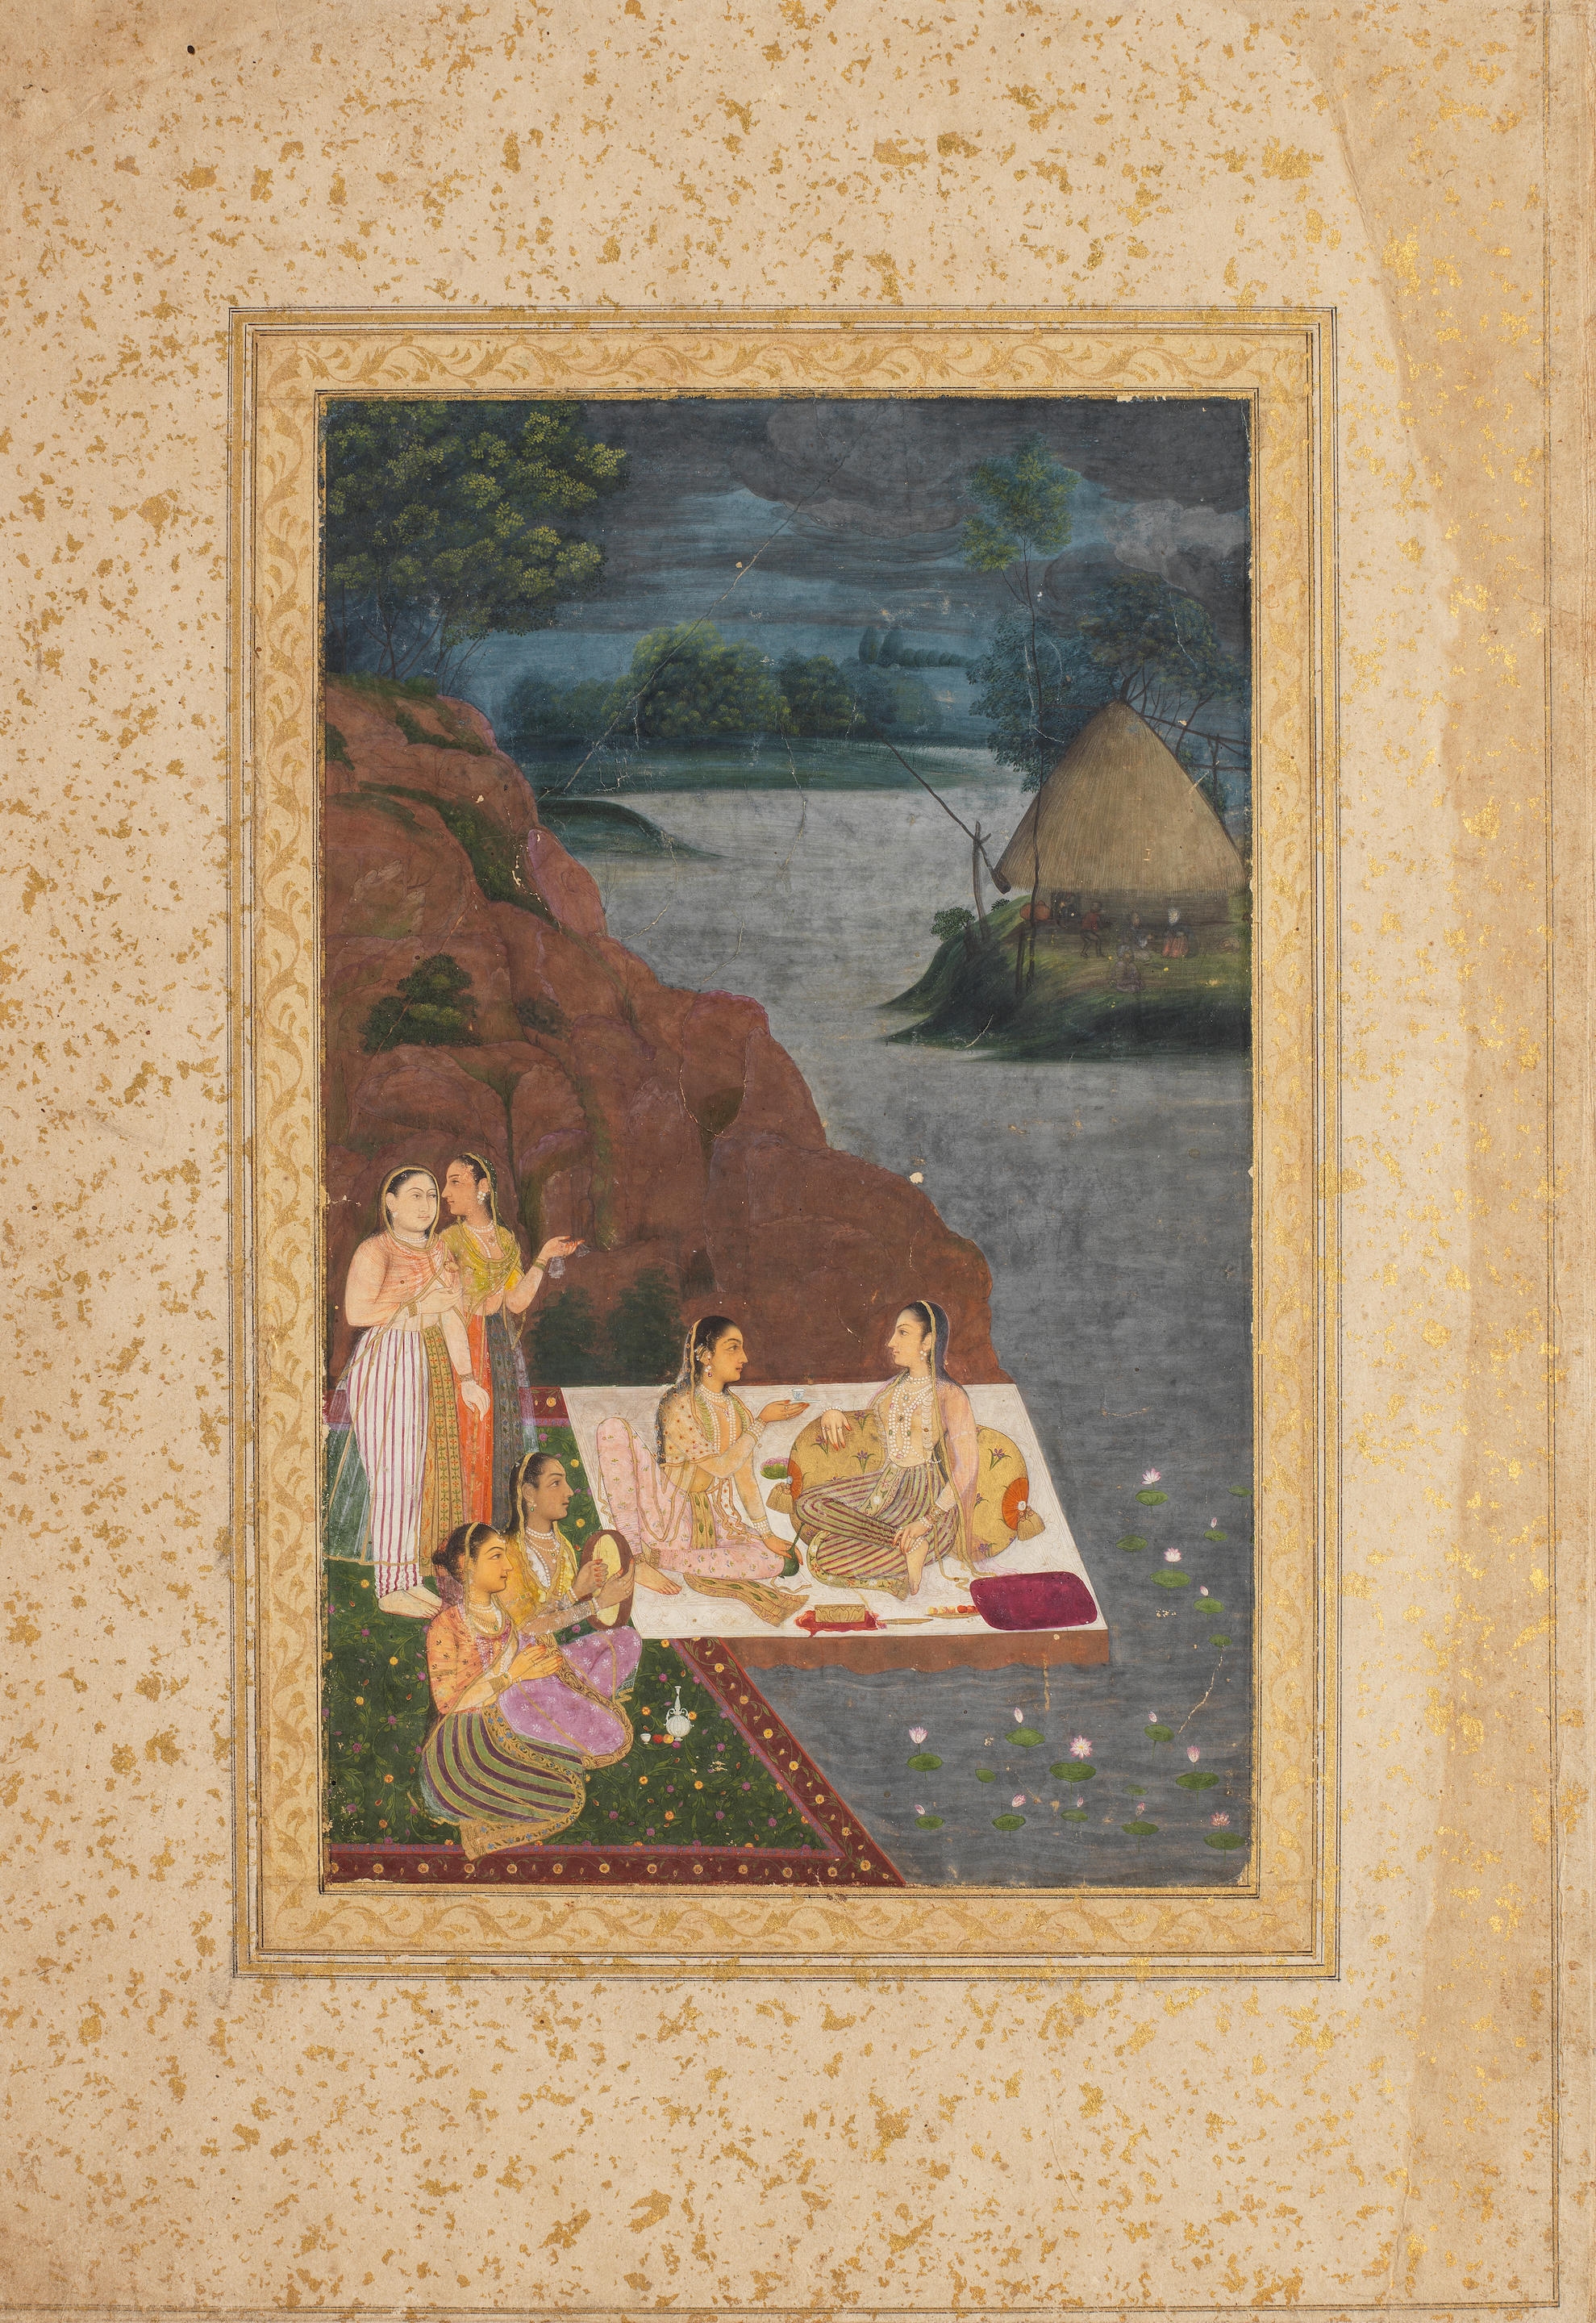 Maidens at leisure on a riverbank, fishermen beyond on the opposite bank by Mughal School, 18th Century, circa 1760-80